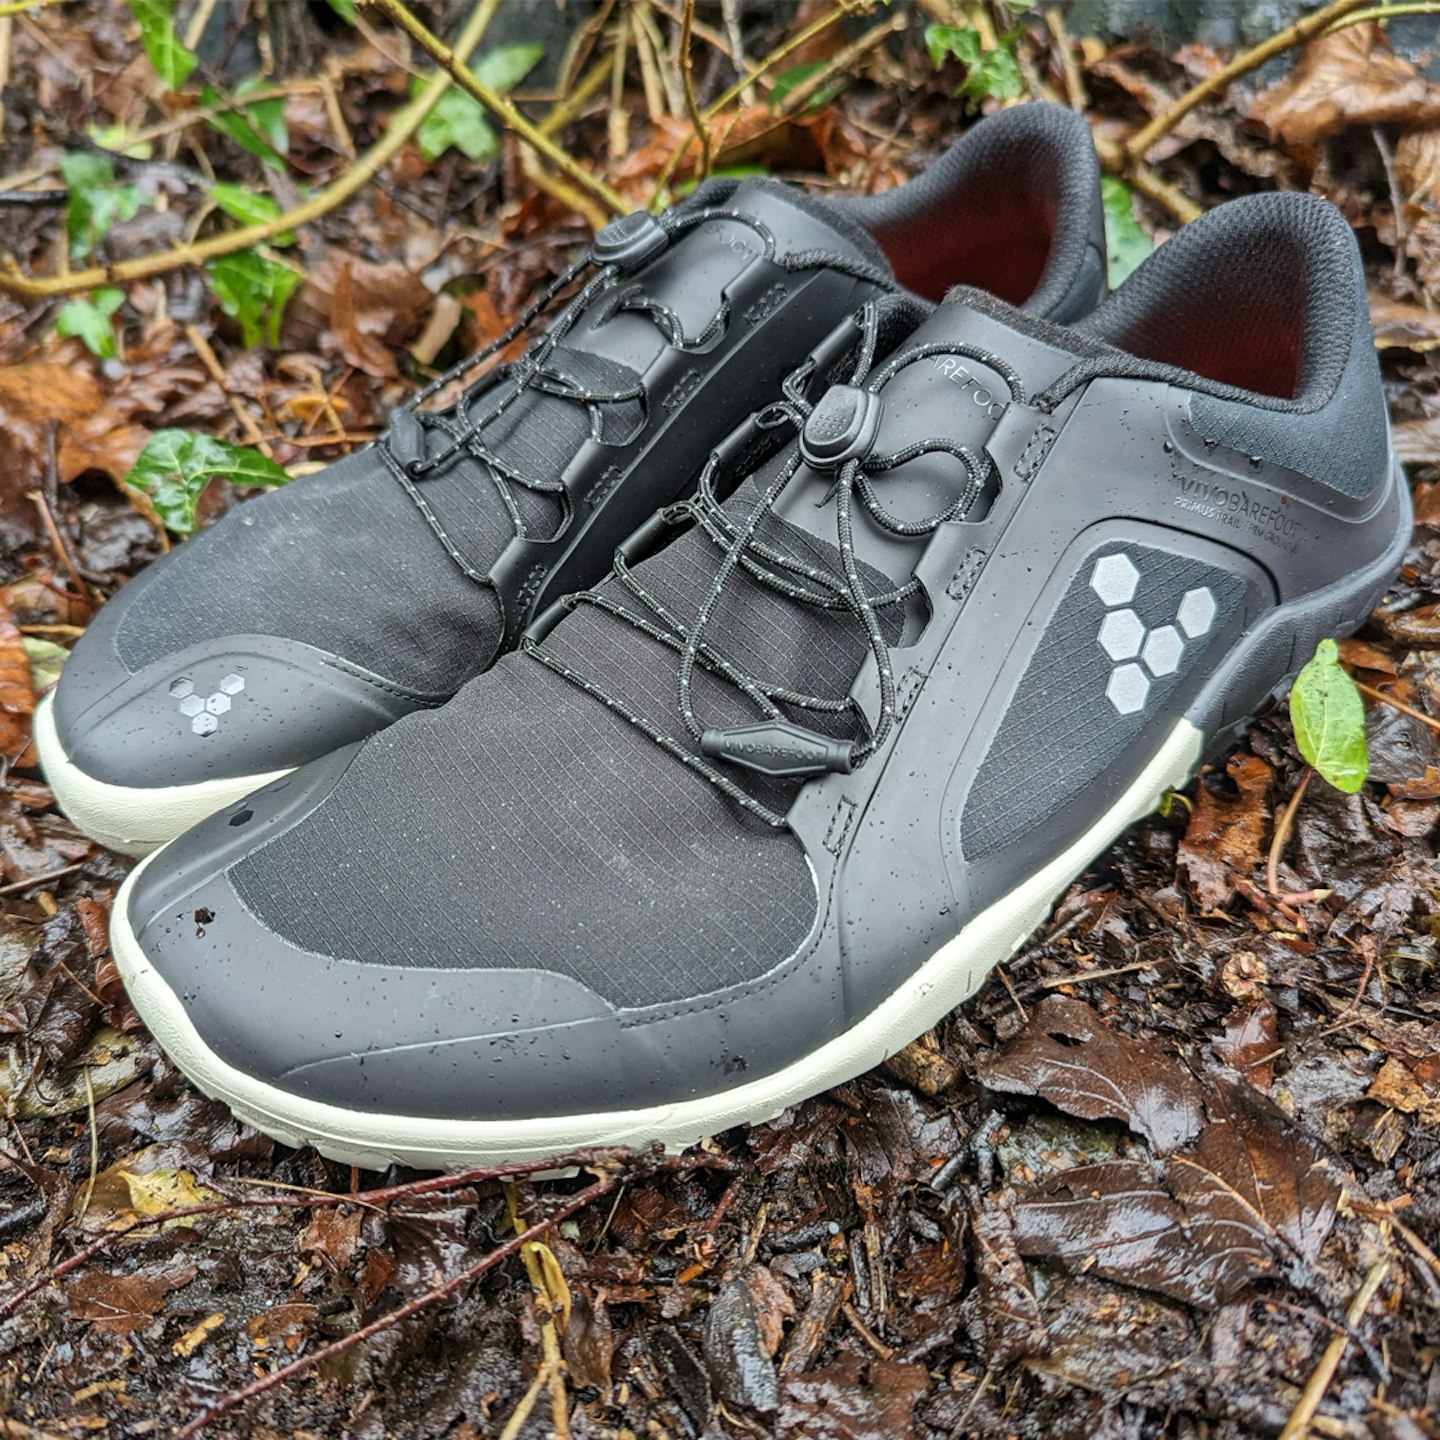 waterproof upper on the Vivobarefoot Primus Trail III All Weather minimalist trailrunning shoes